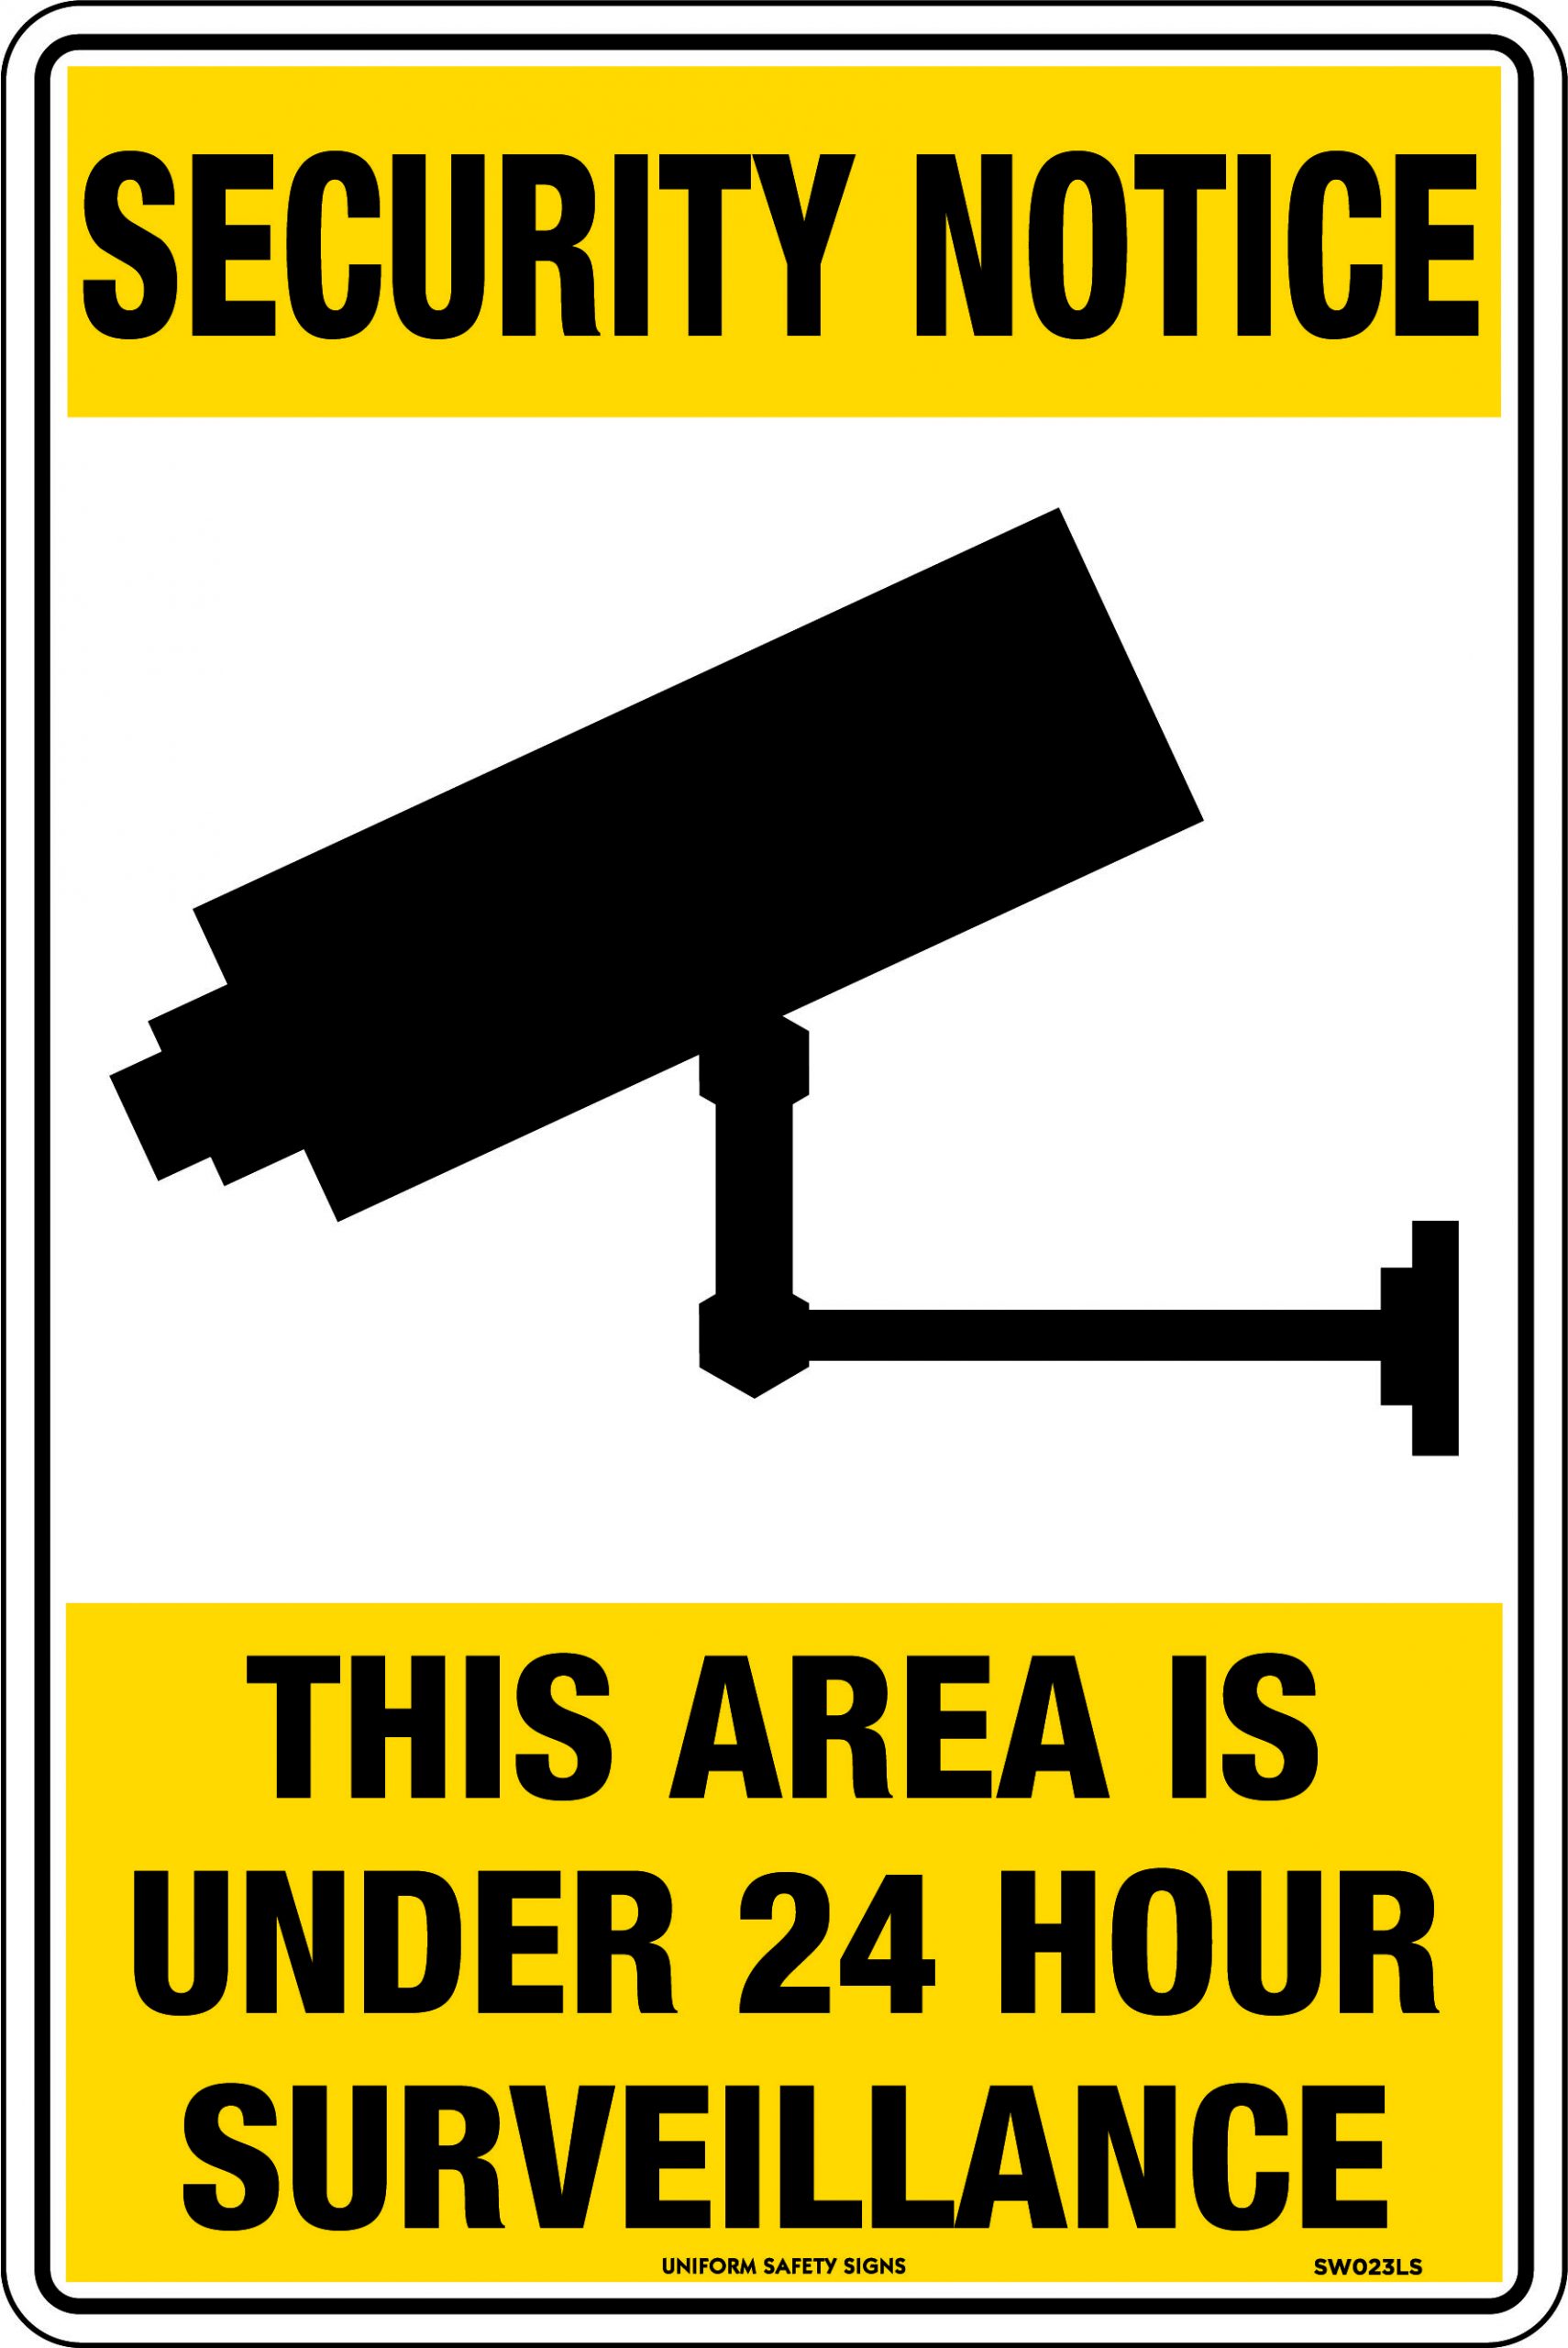 SIGN 600 X 450 METAL SECURITY THIS AREA IS UNDER 24 HOUR SURVEILLANCE